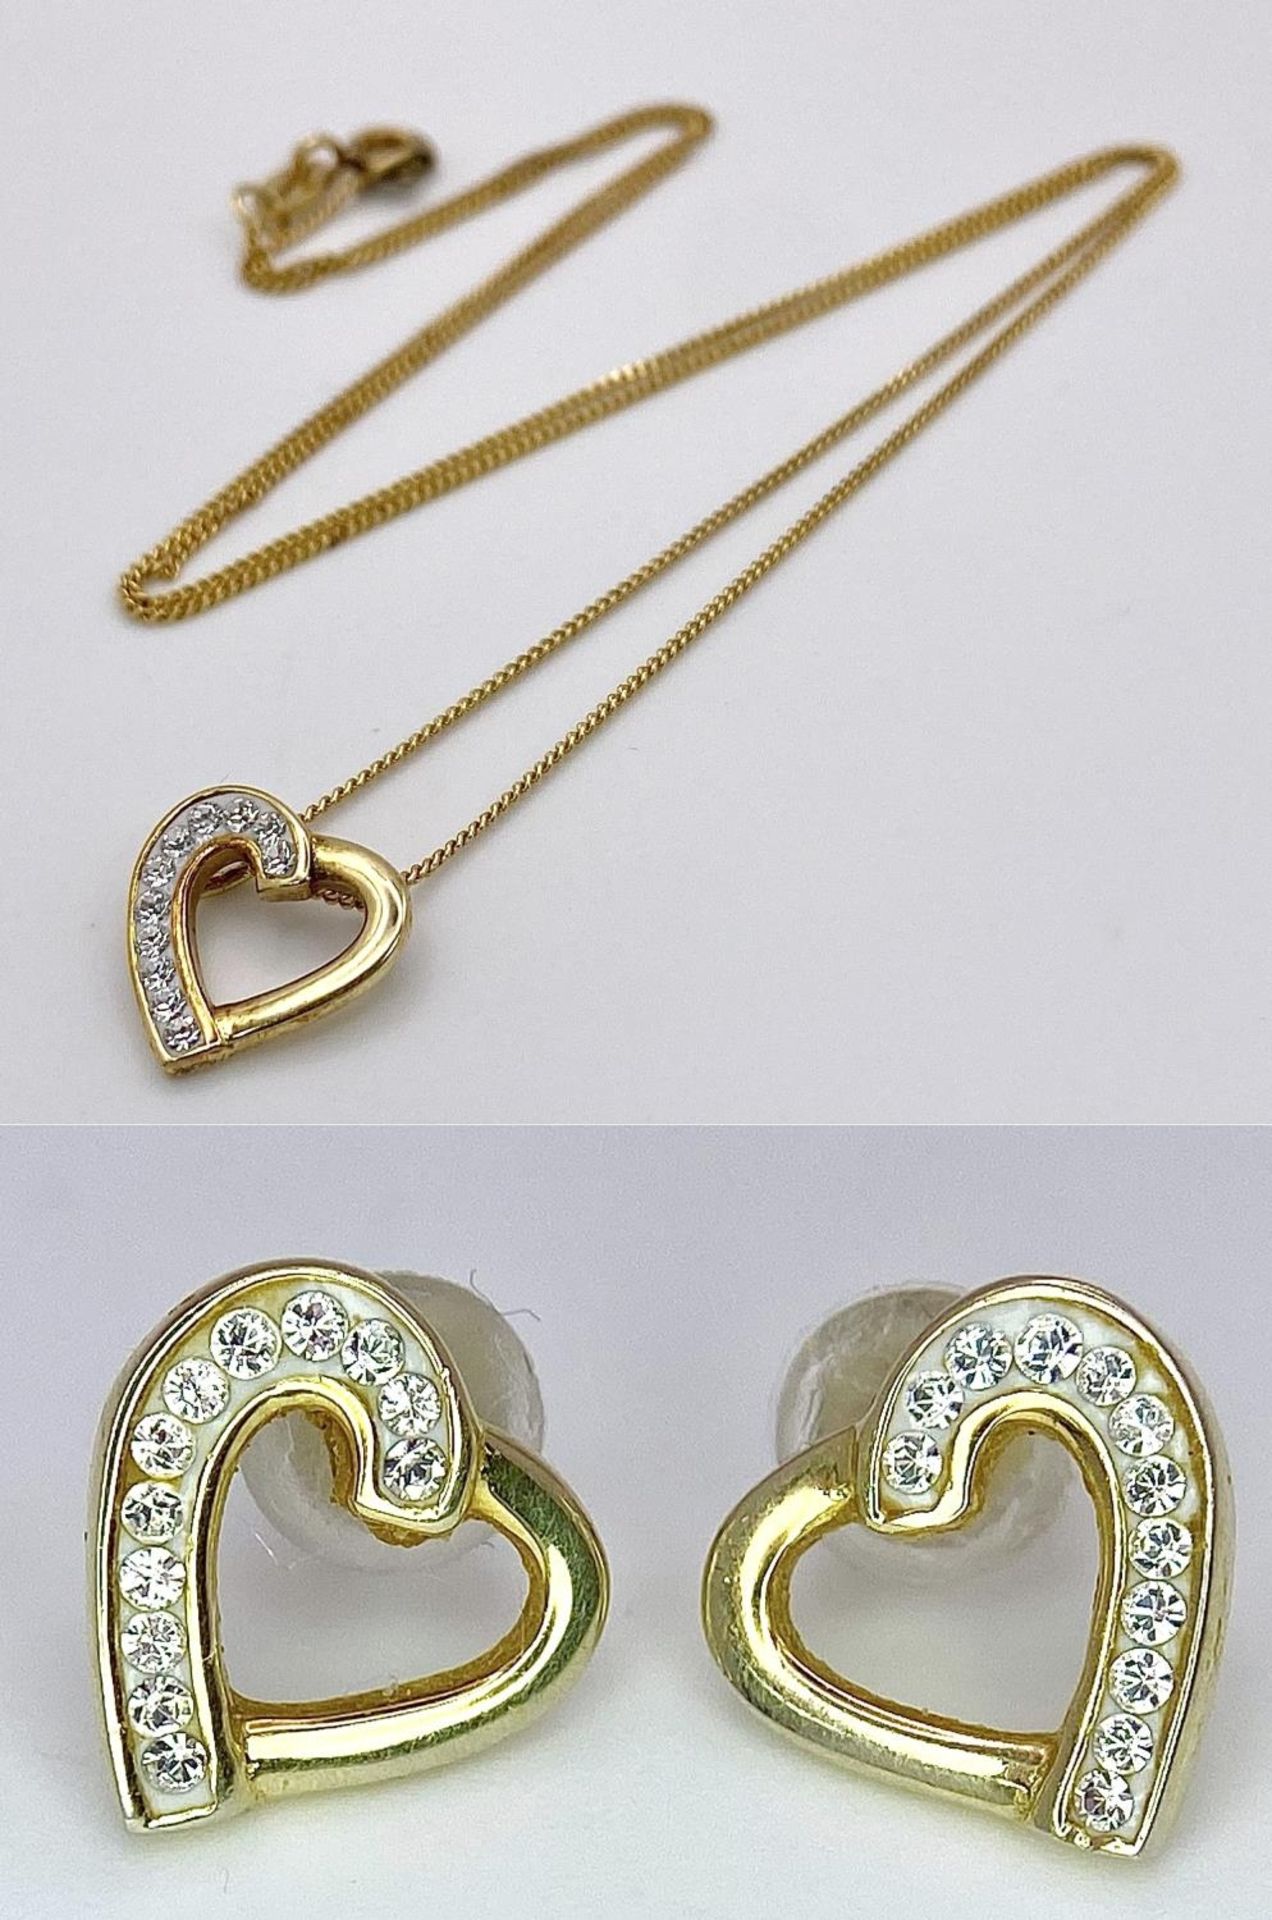 An Evoke Gilded Silver and Zircon Earring and Necklace Set. In original packaging.